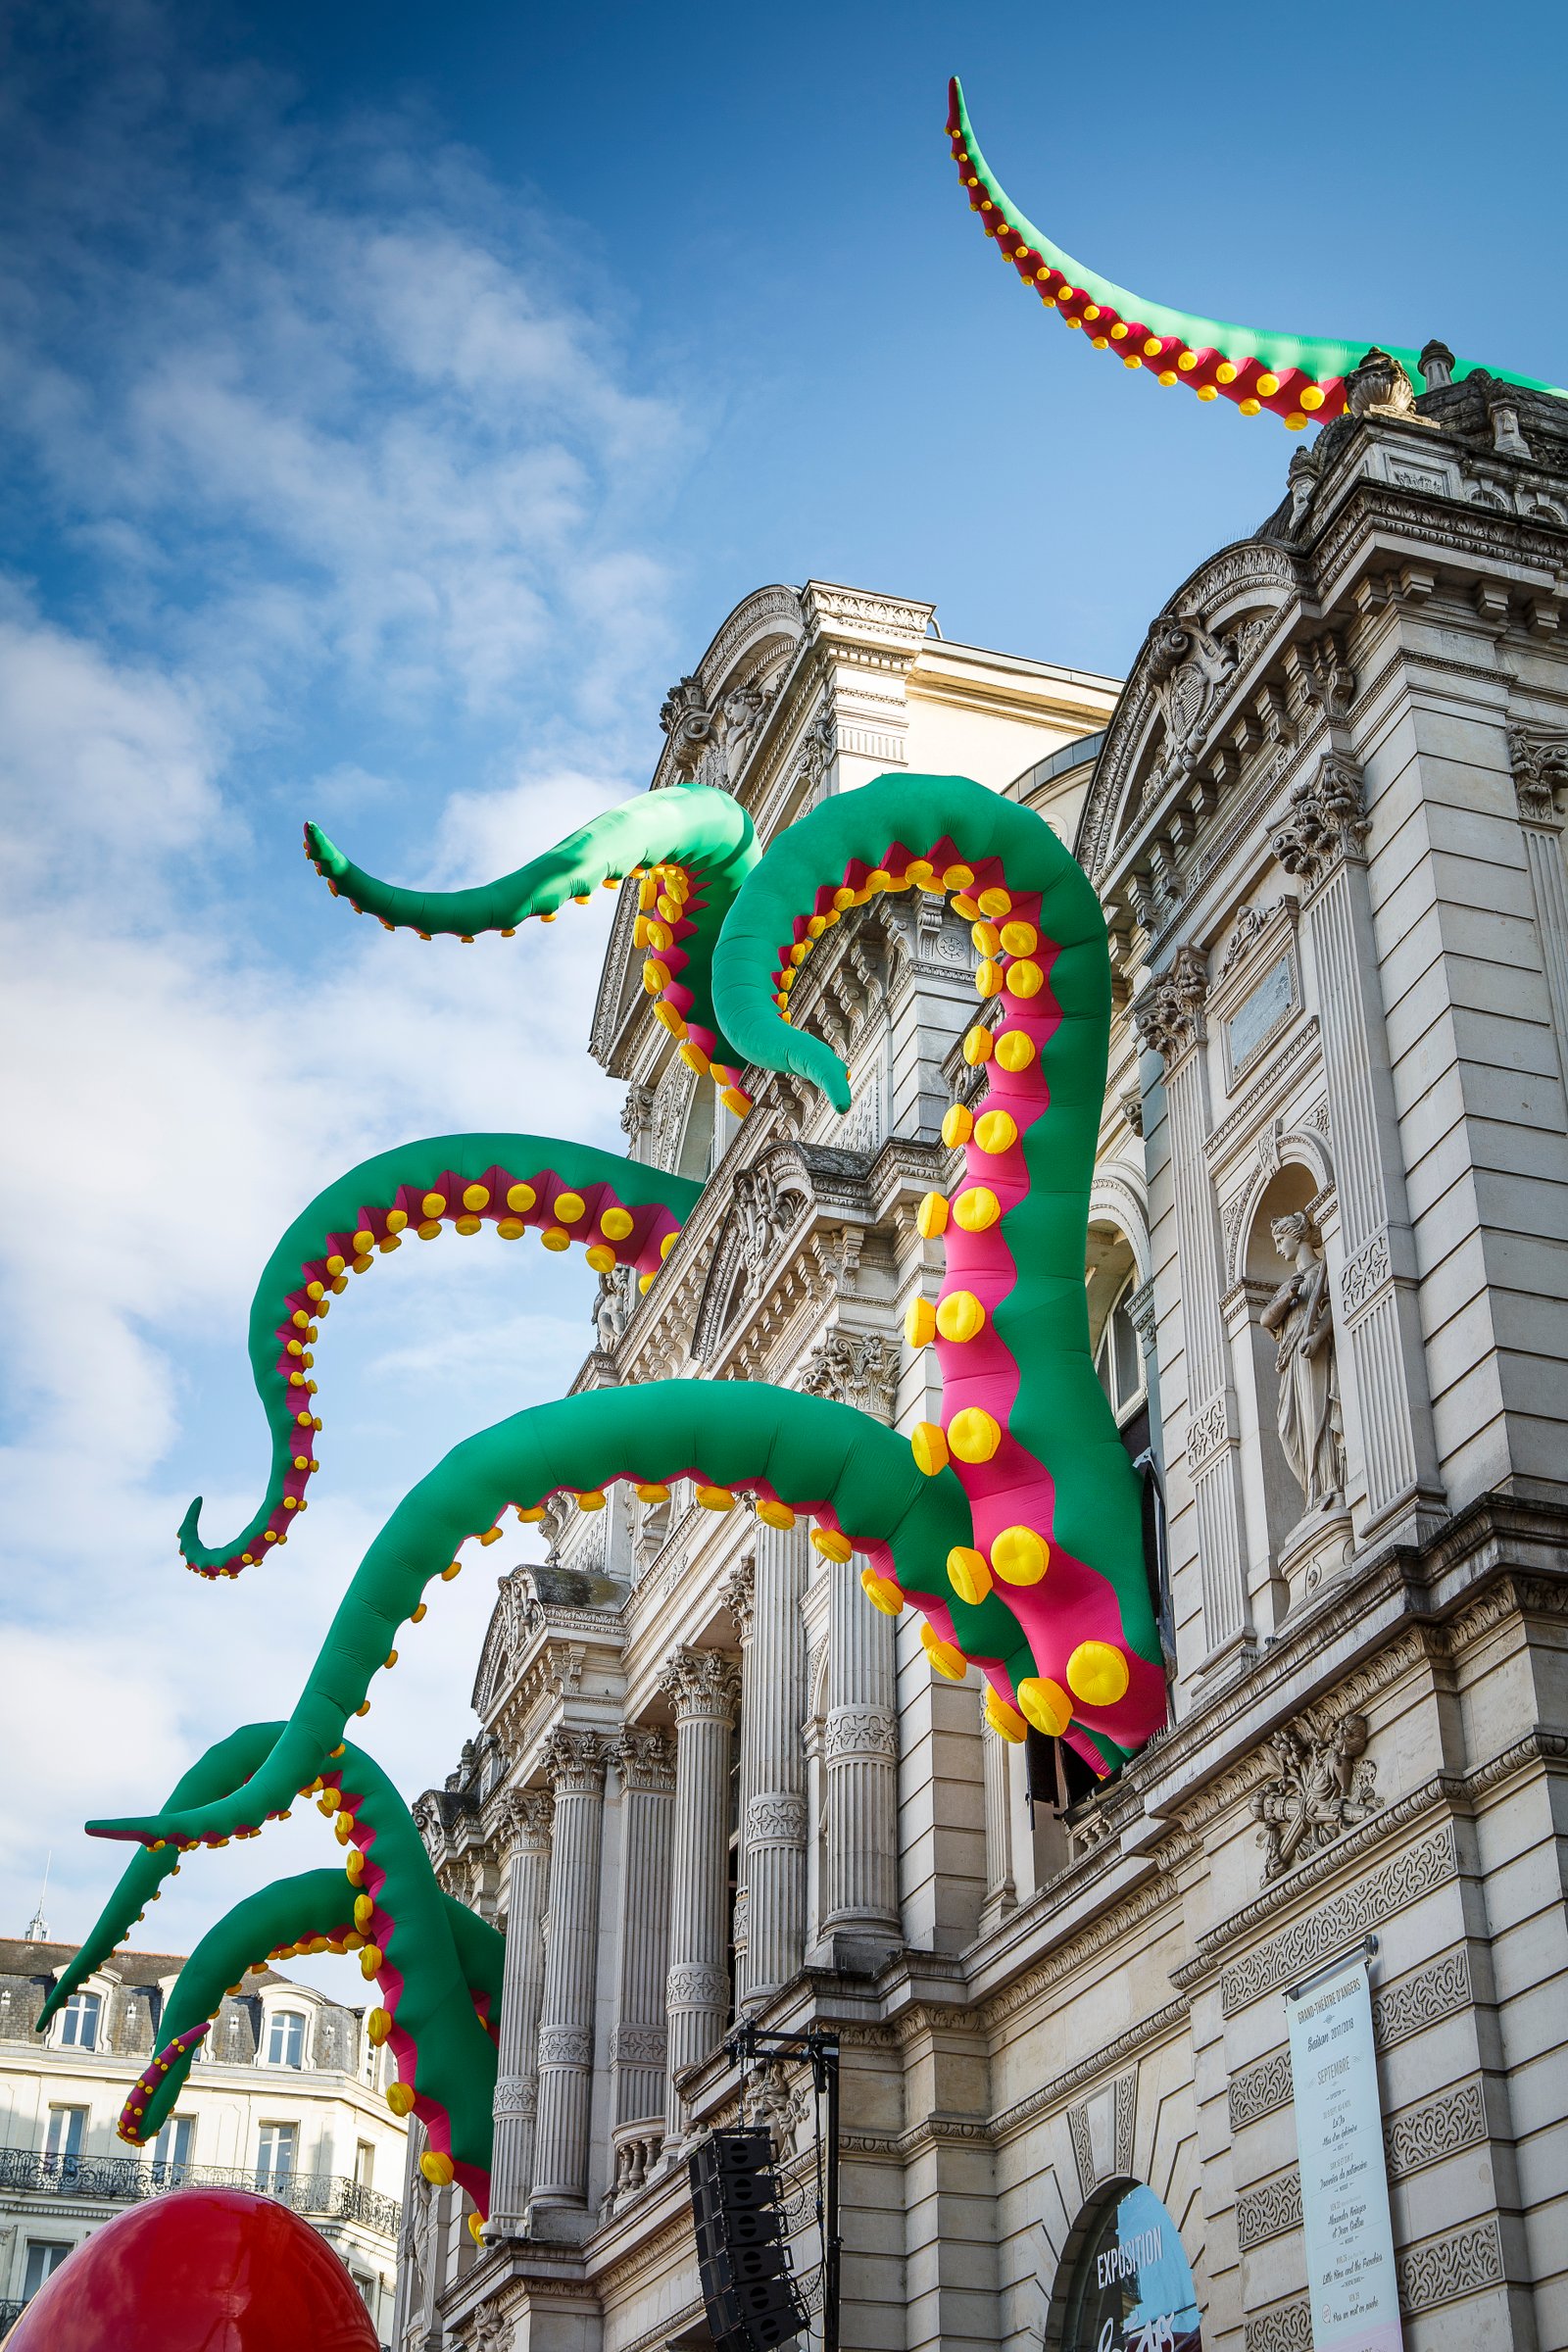 Large green and yellow octopus tentacles swarm out of the windows of a large stone building